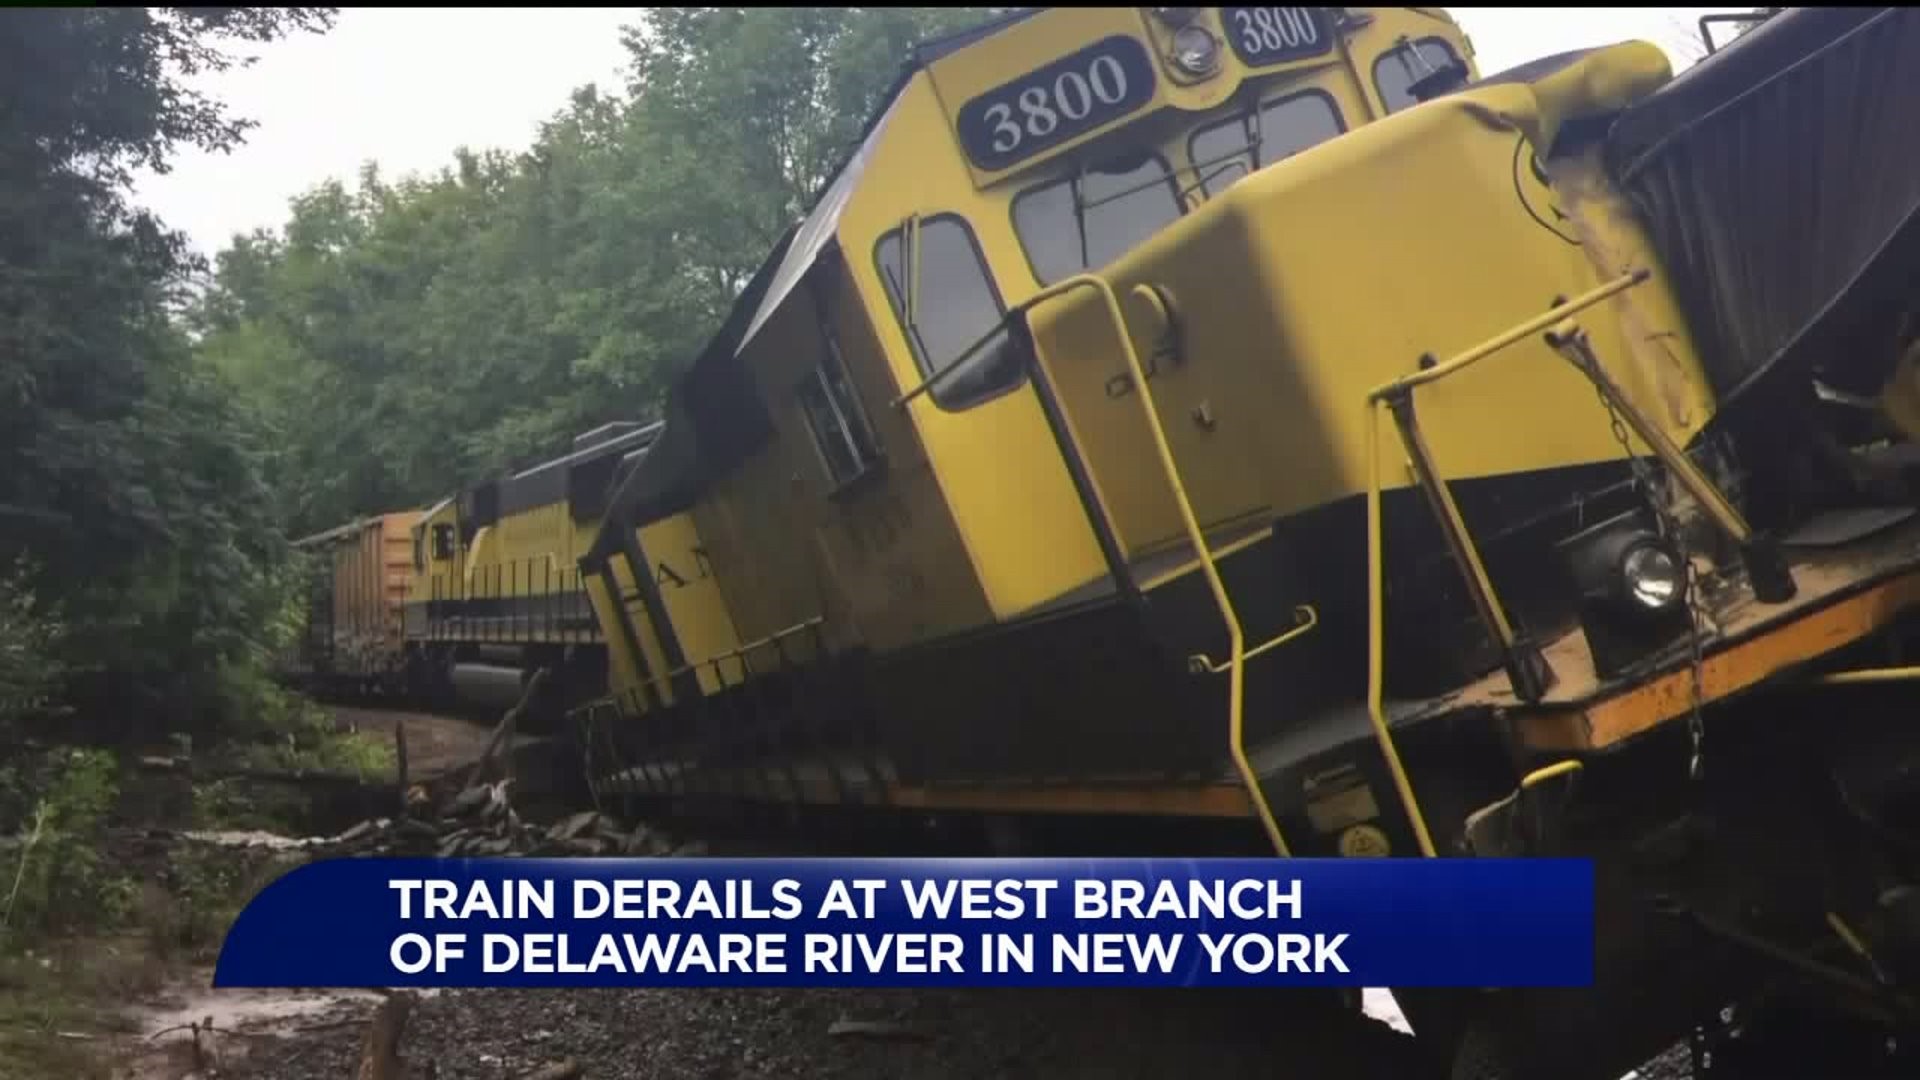 Train Crash Spills Thousands of Gallons of Fuel Into Delaware River